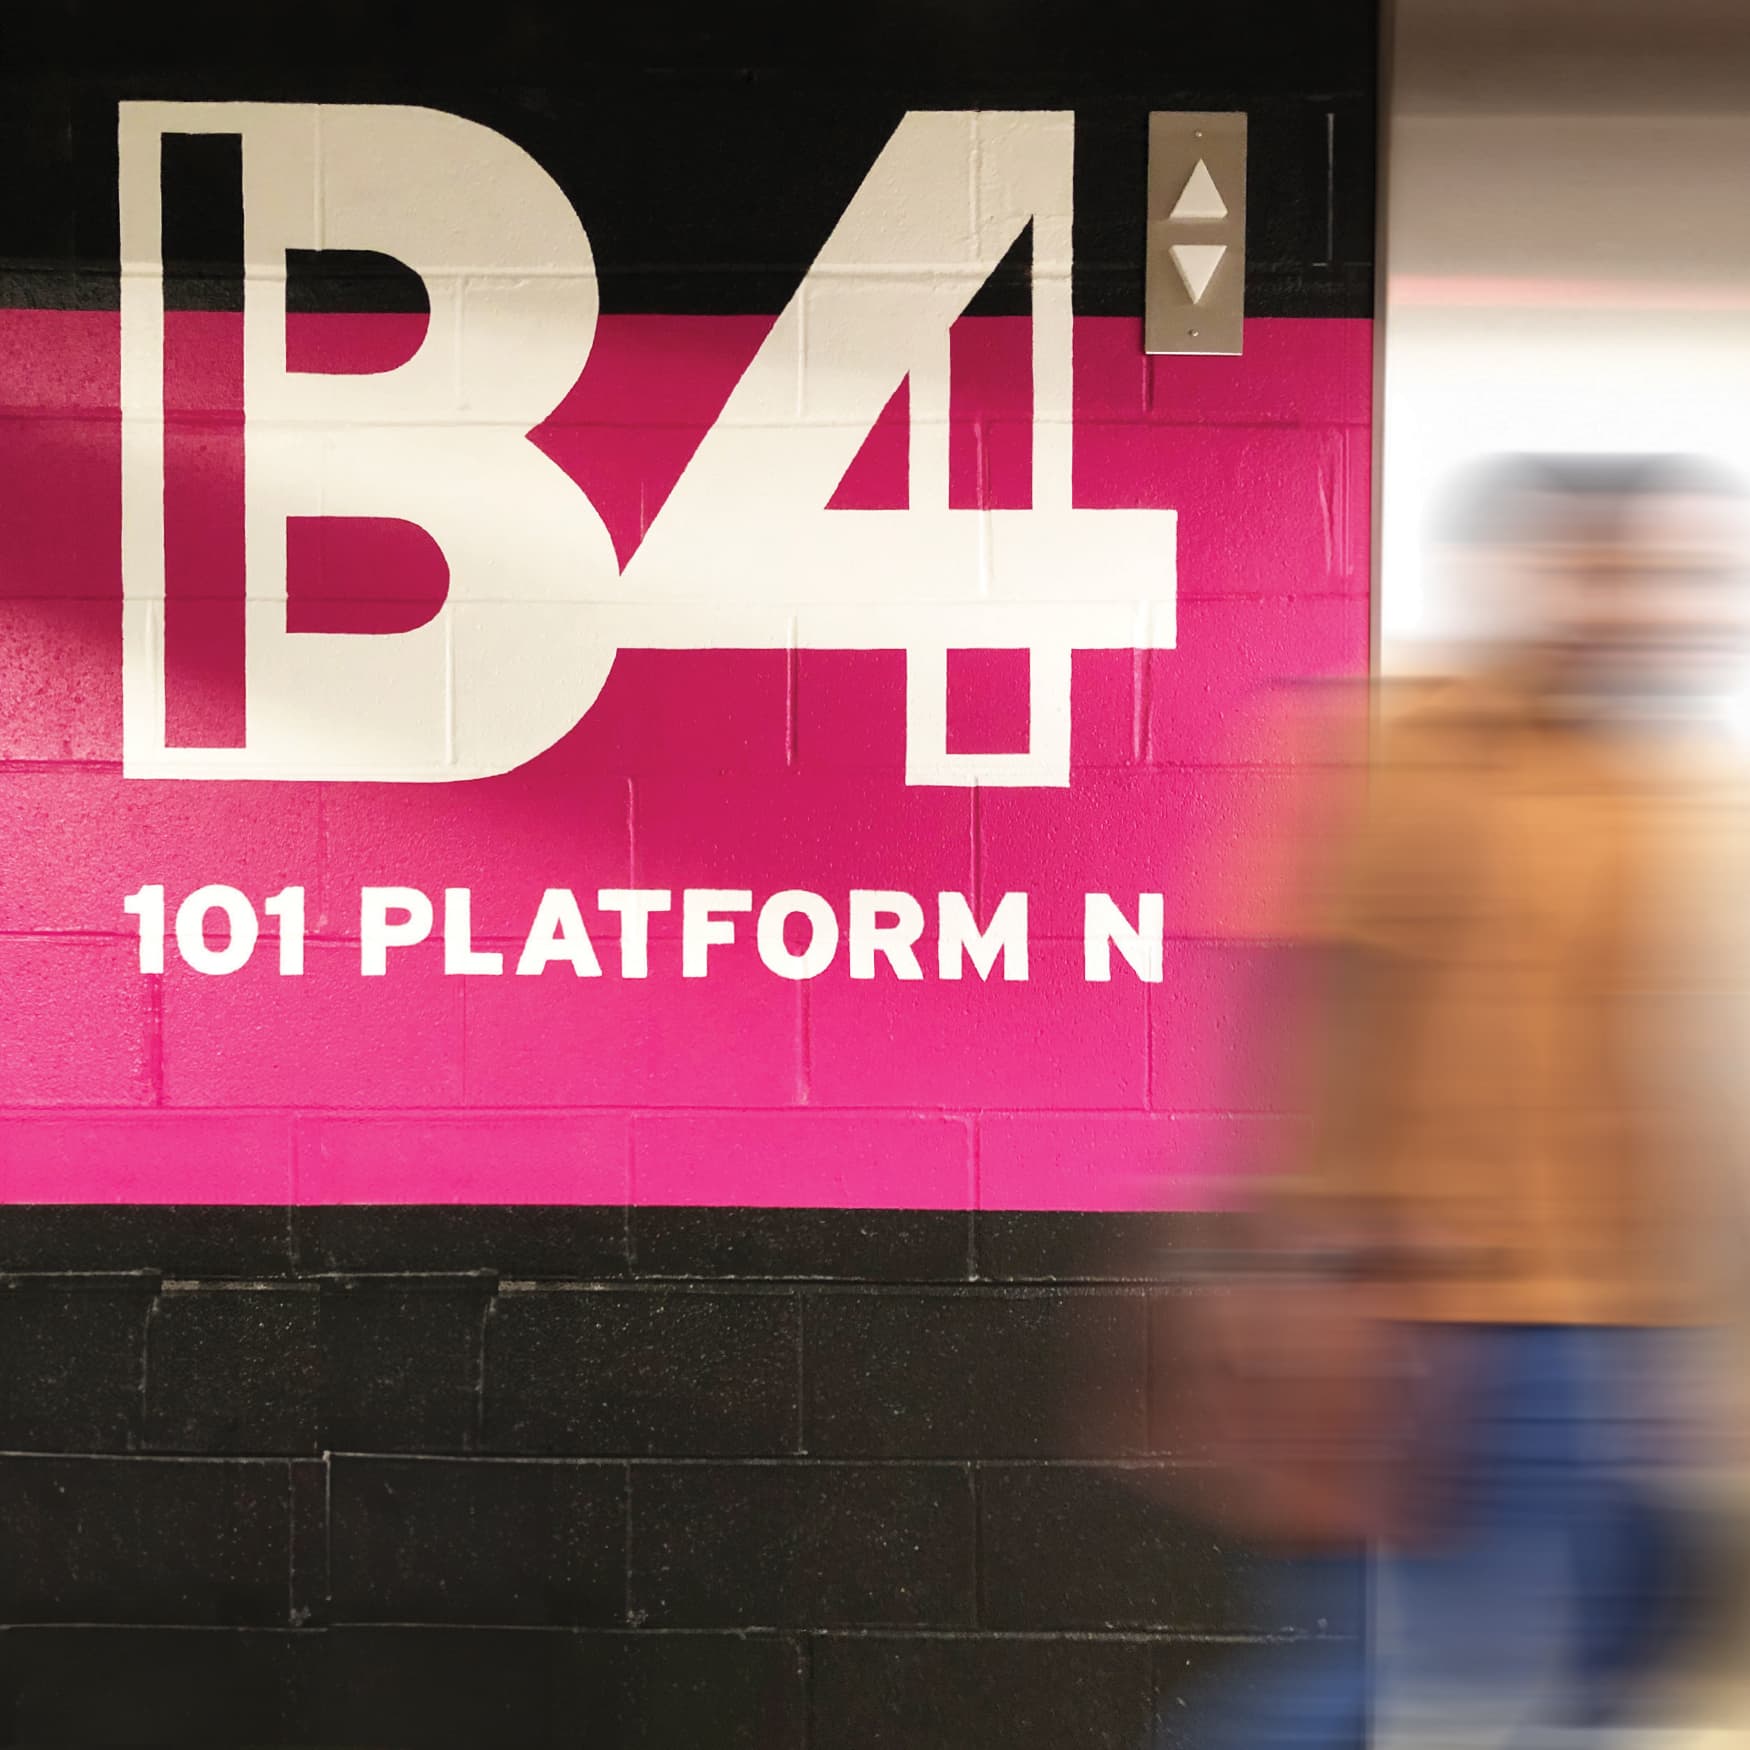 Colorful and geometric signage of B4 parking garage signage. Pink and black color blocked paint, designed by RSM Design. 